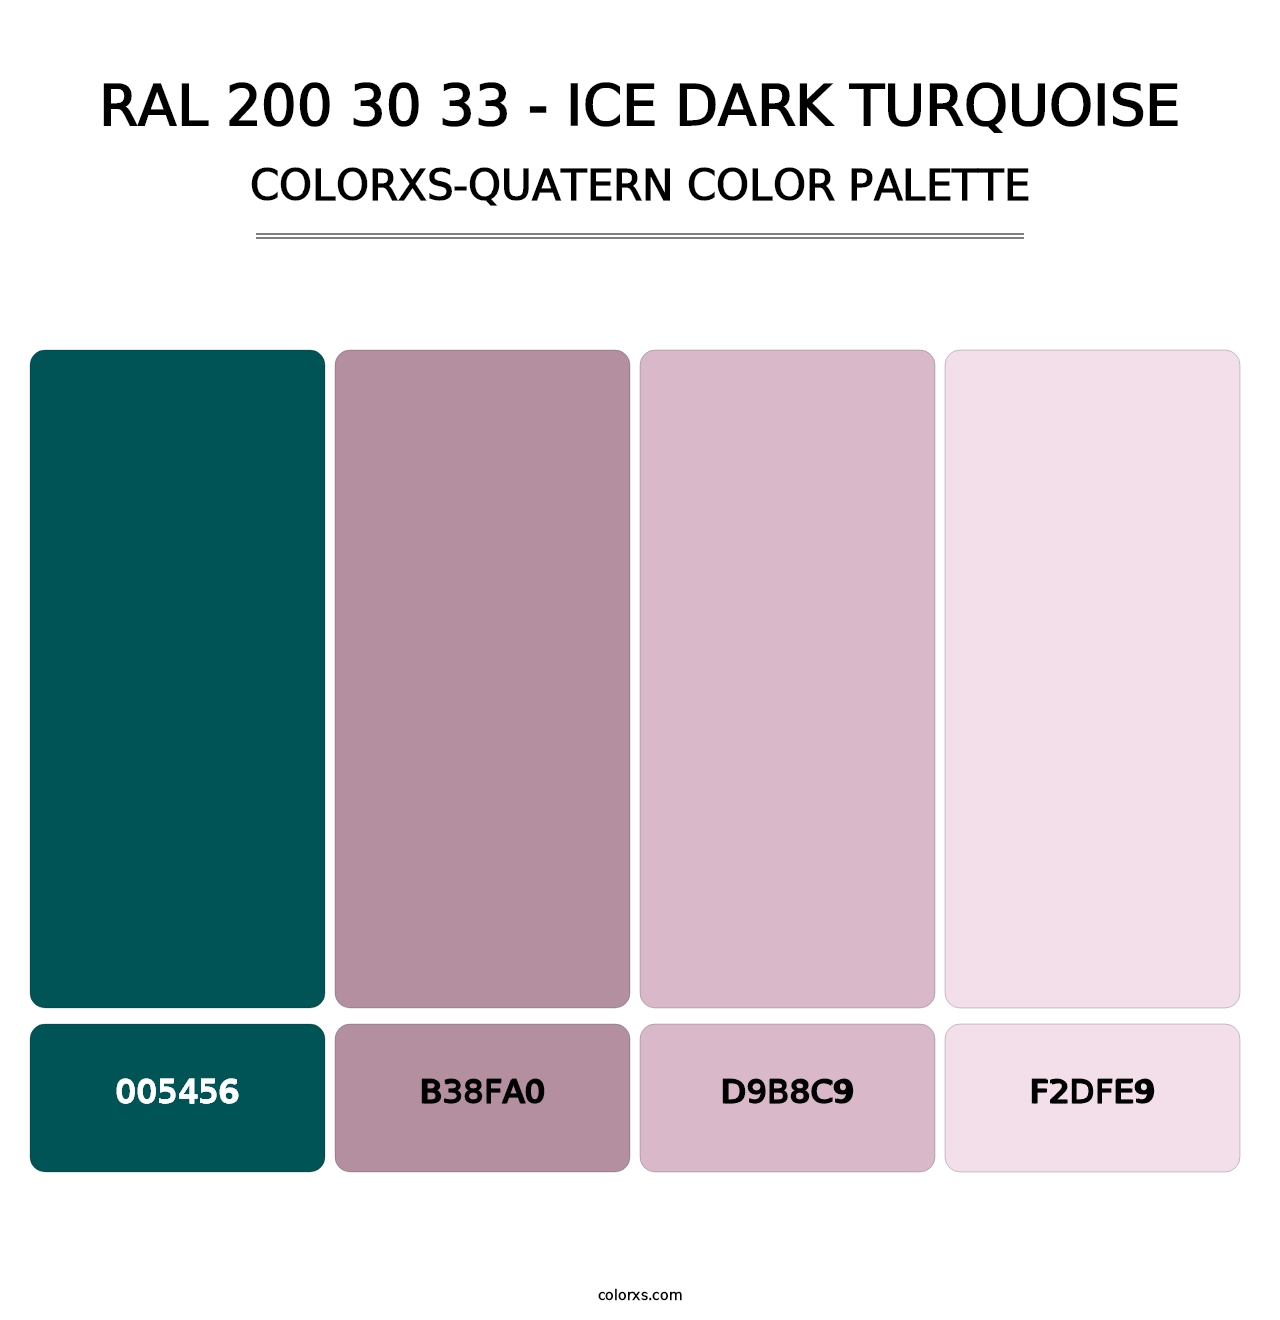 RAL 200 30 33 - Ice Dark Turquoise - Colorxs Quatern Palette